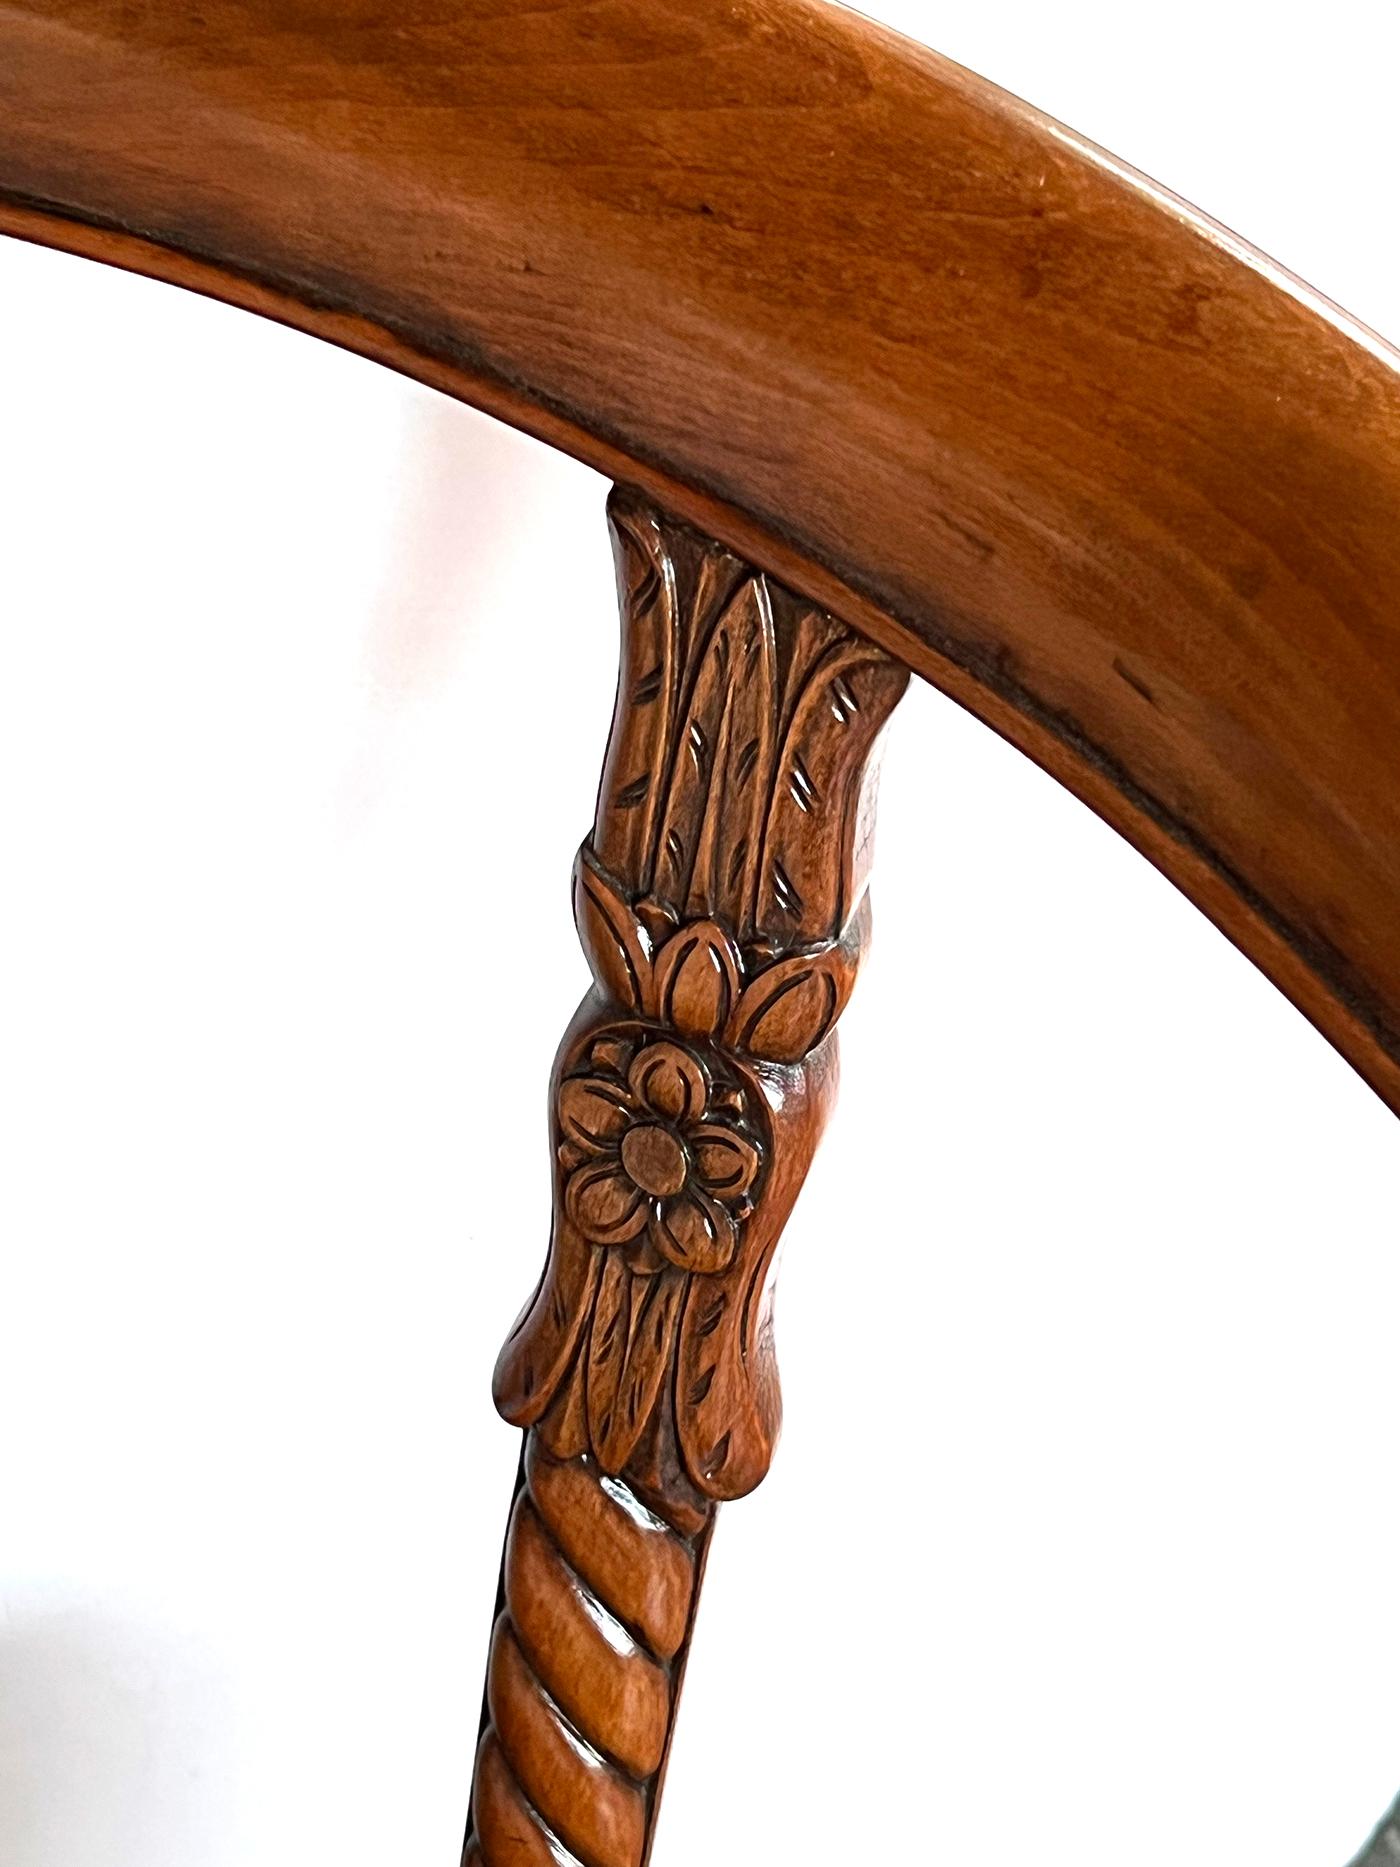 Each with sloping in-curved crest rail over vertical spiral-carved stiles; joining a u-shaped tight seat above a reeded apron all raised on cabriole supports joined by a carved x-form stretcher.